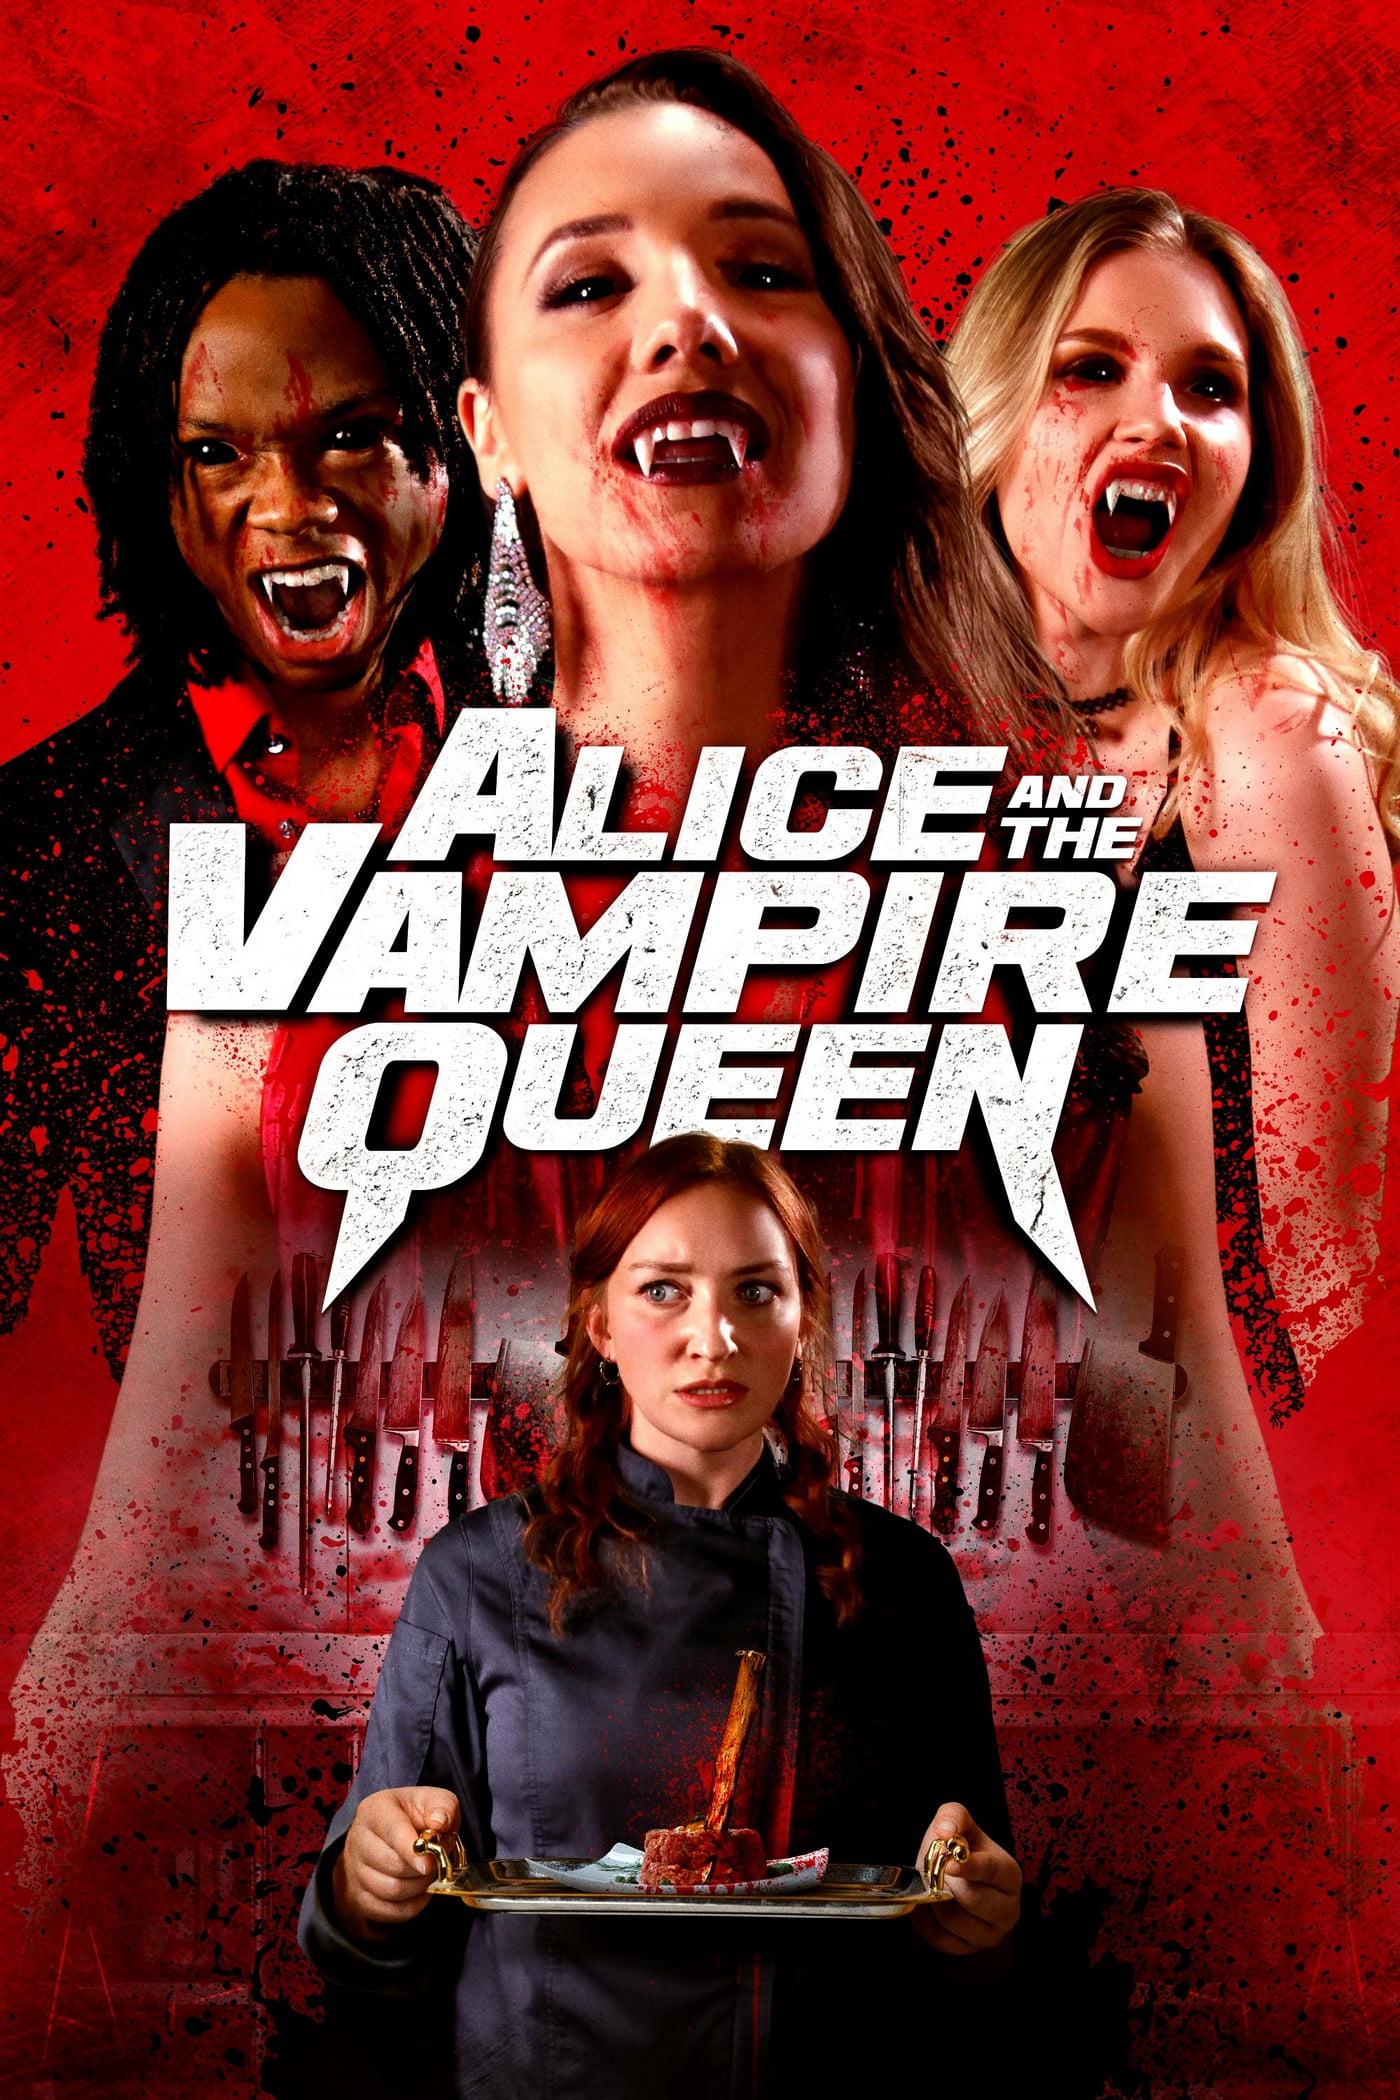 Alice and the Vampire Queen poster